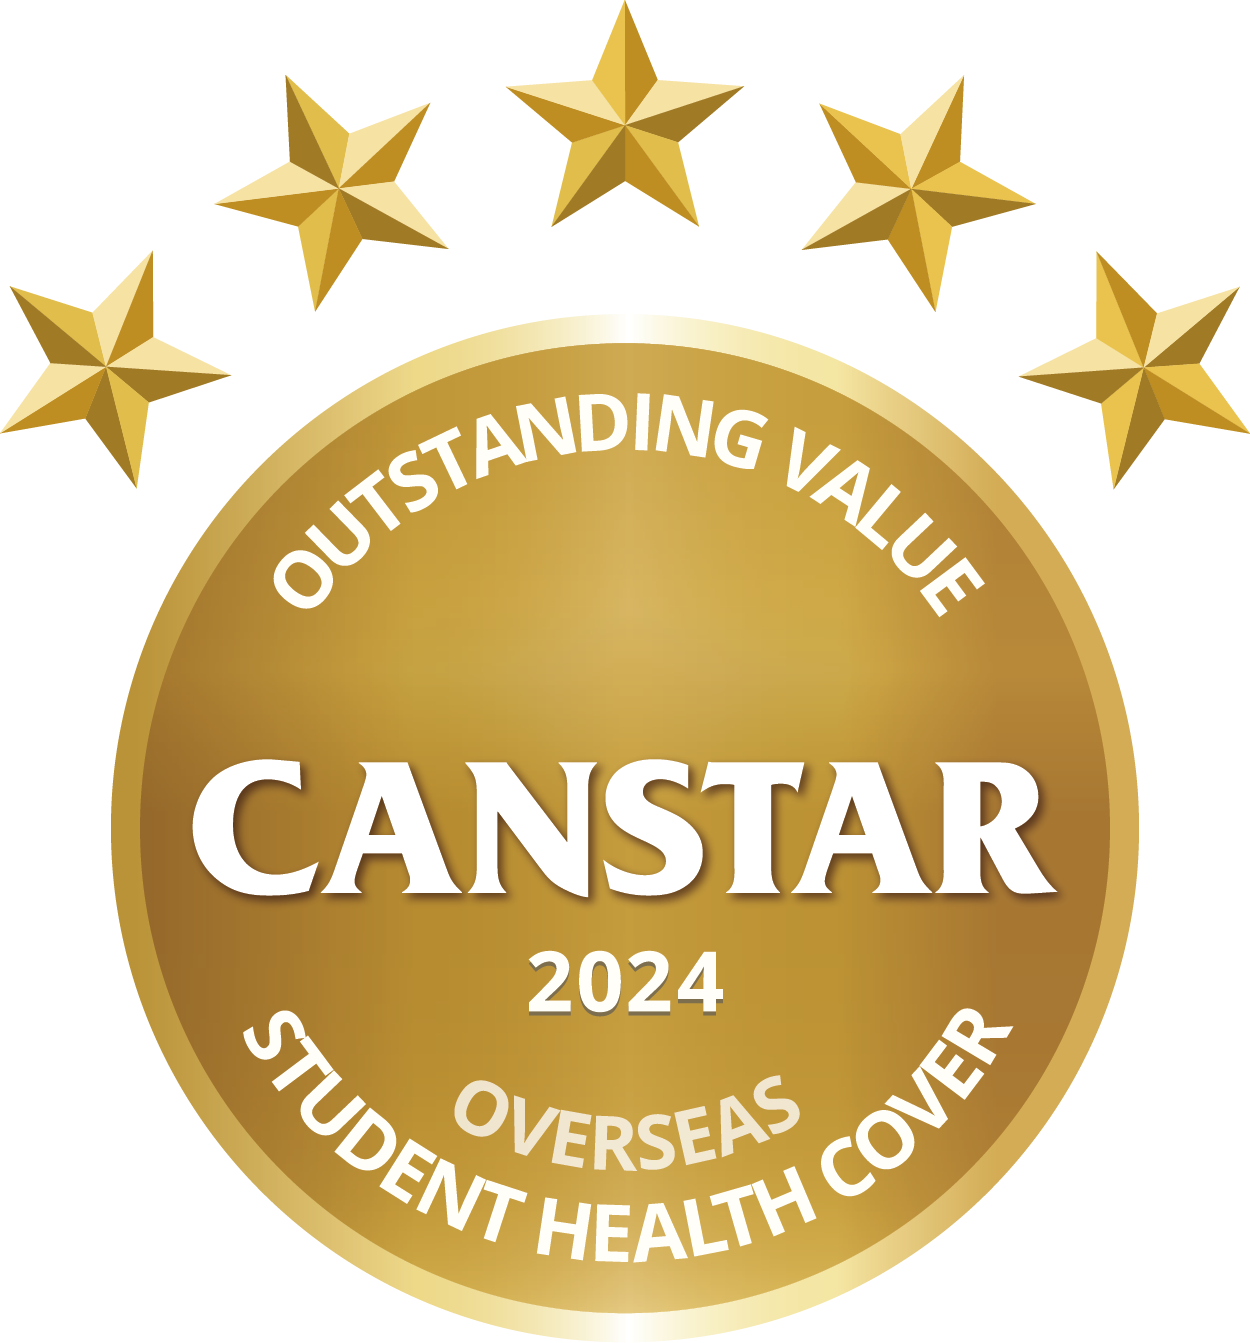 Canstar award for outstanding value for overseas student health cover 2022